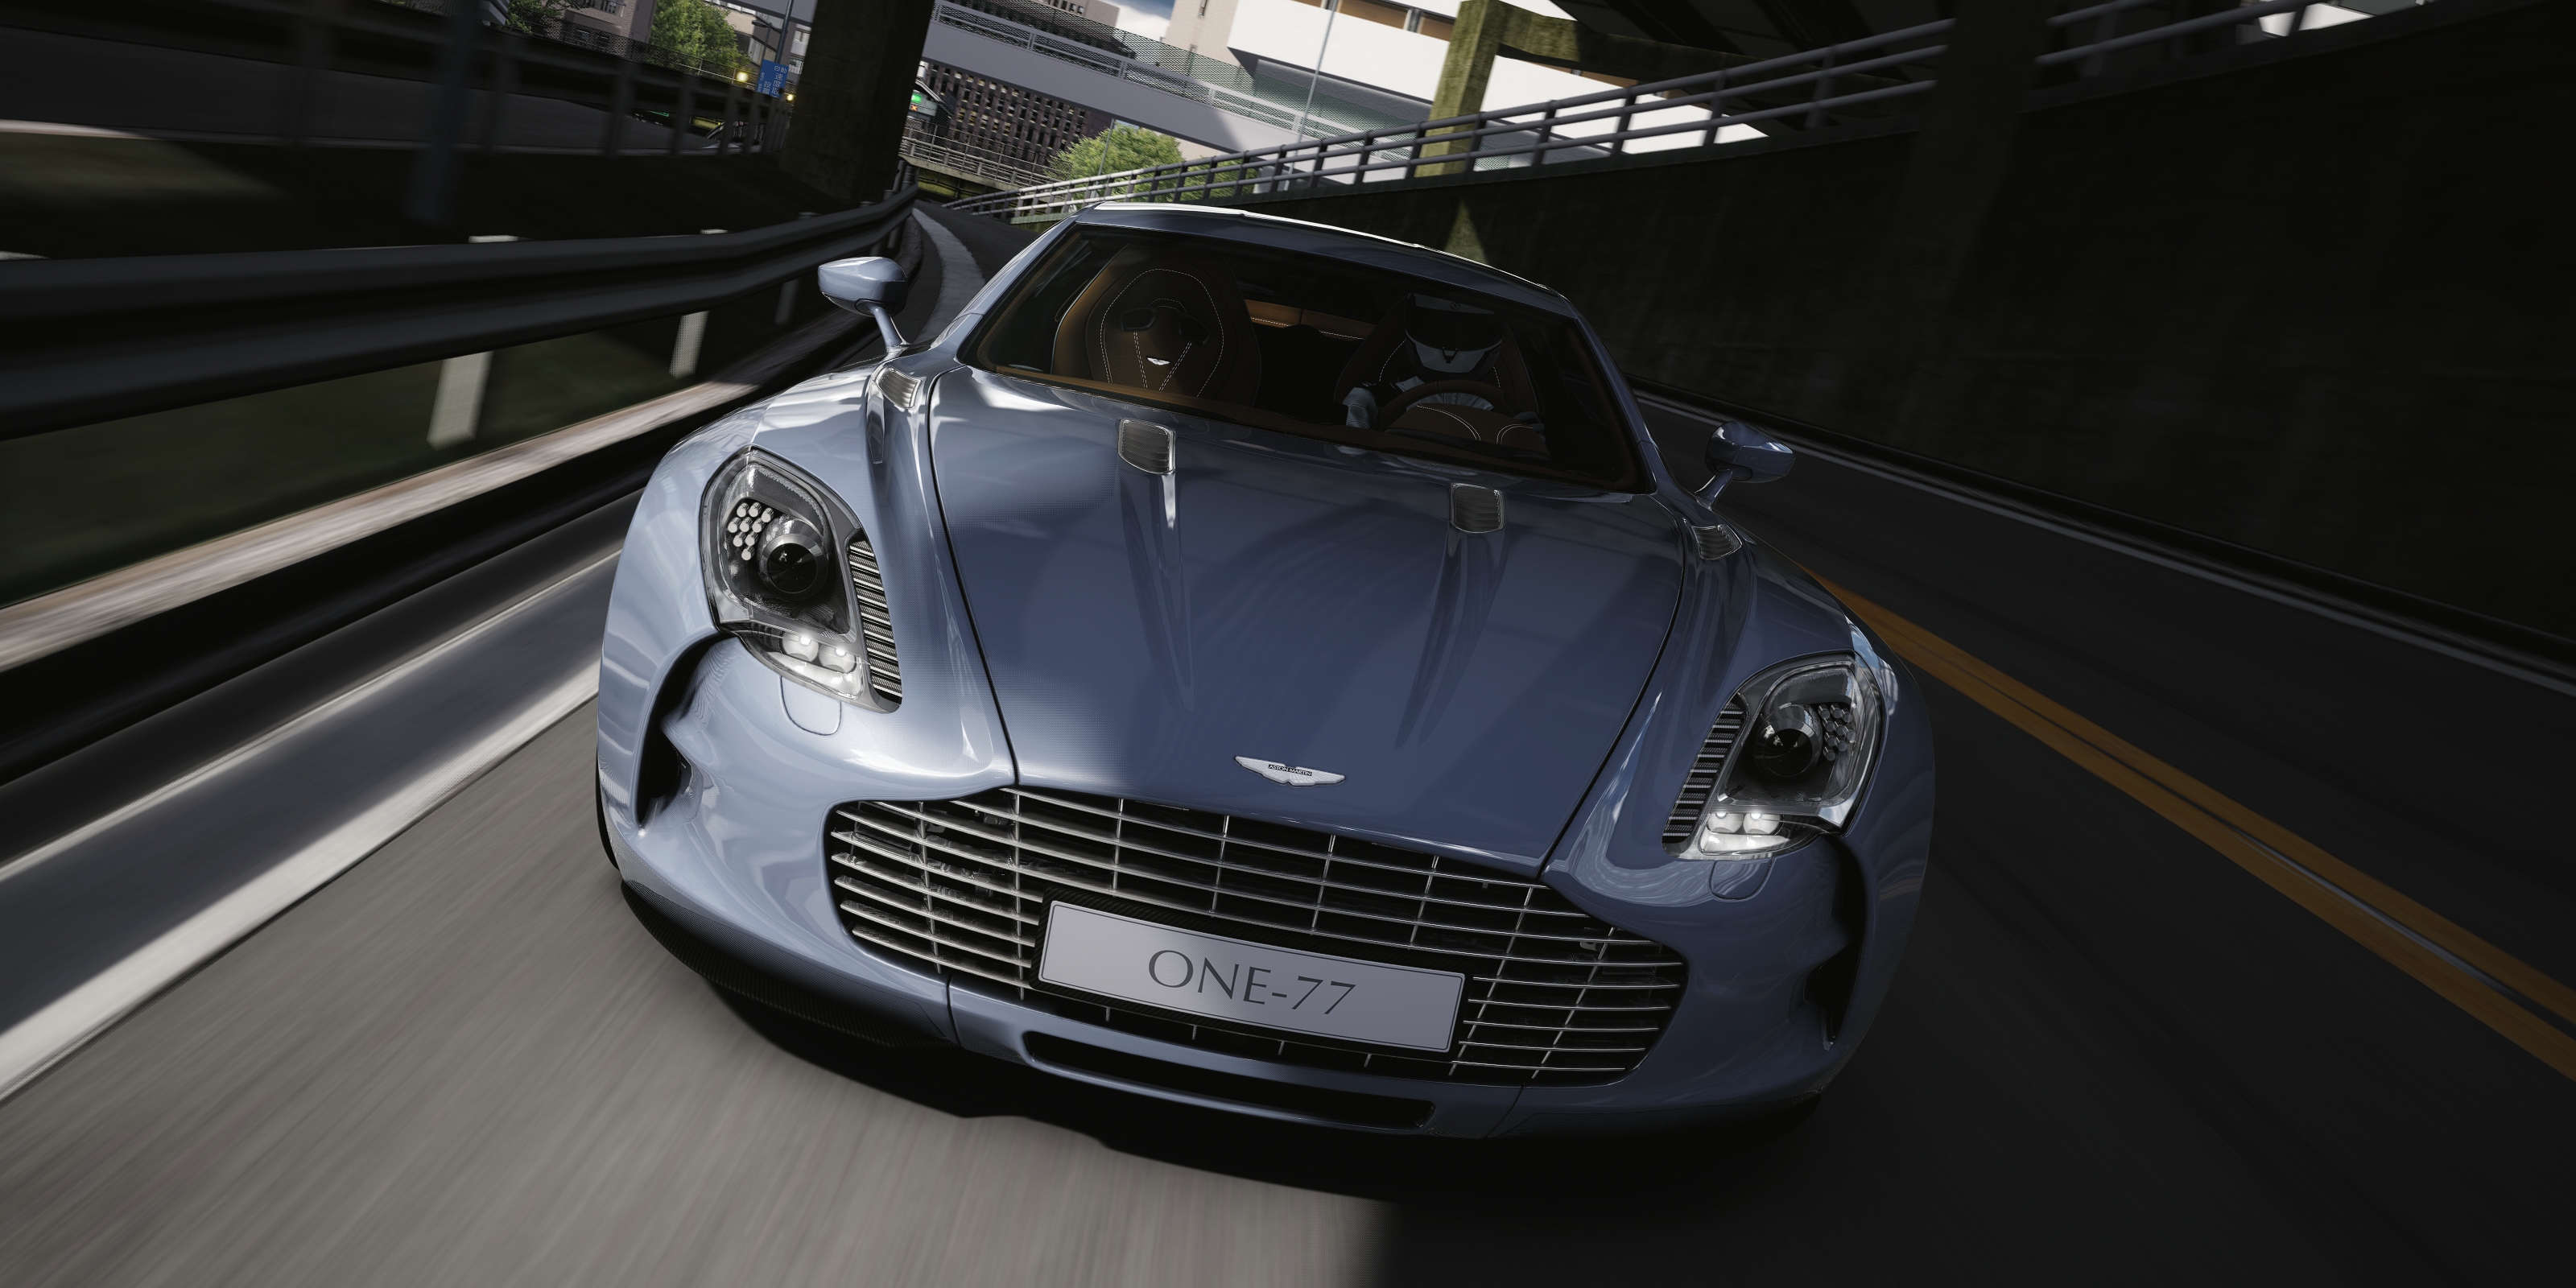 General 3200x1600 Assetto Corsa car video games Aston Martin One 77 frontal view road licence plates CGI headlights video game art